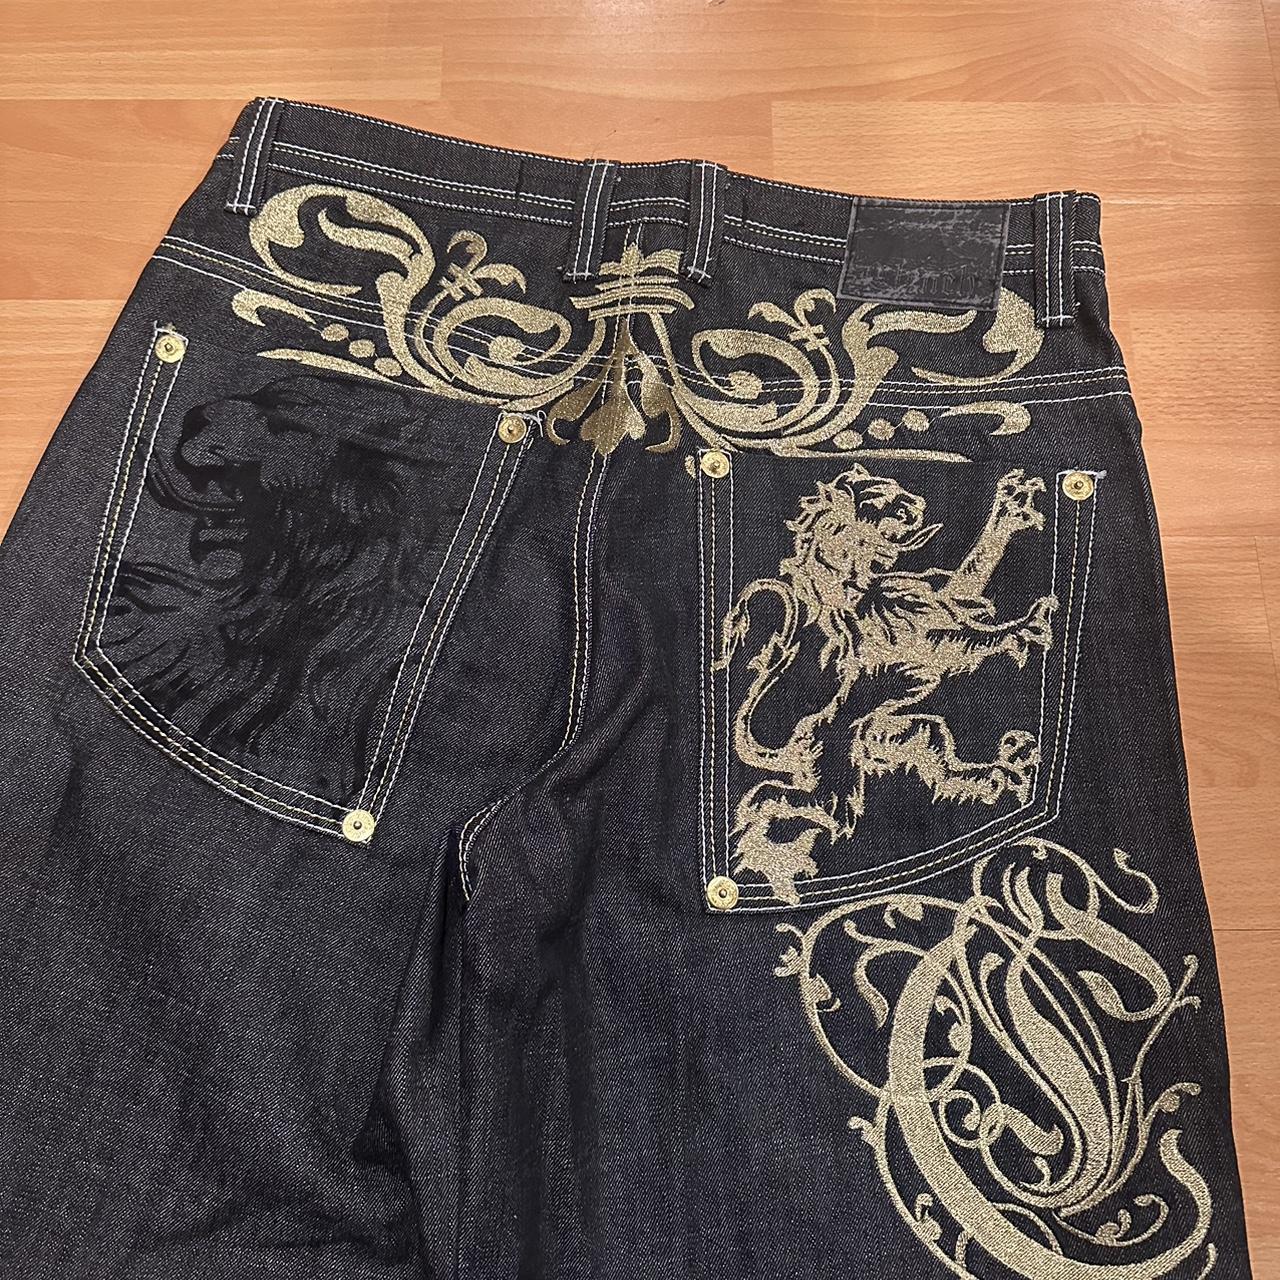 CRAZY CLETCH JORTS OPEN TO OFFERS AND TRADES... - Depop